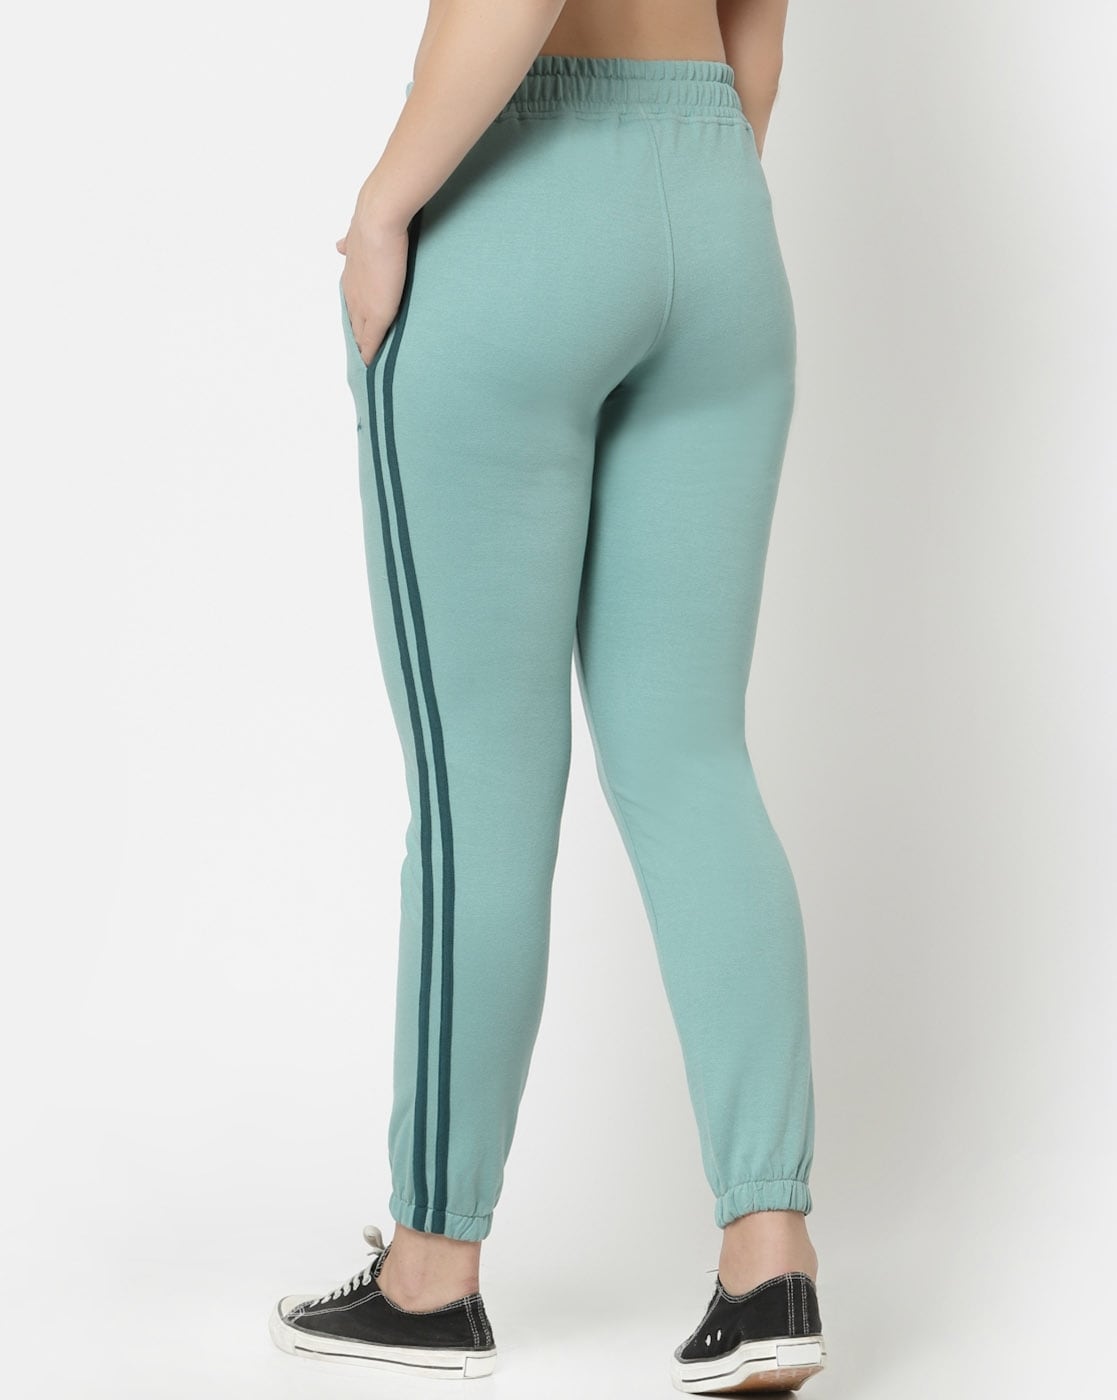 Womens Track Pants and Yoga Pants Manufacturer in New York, California